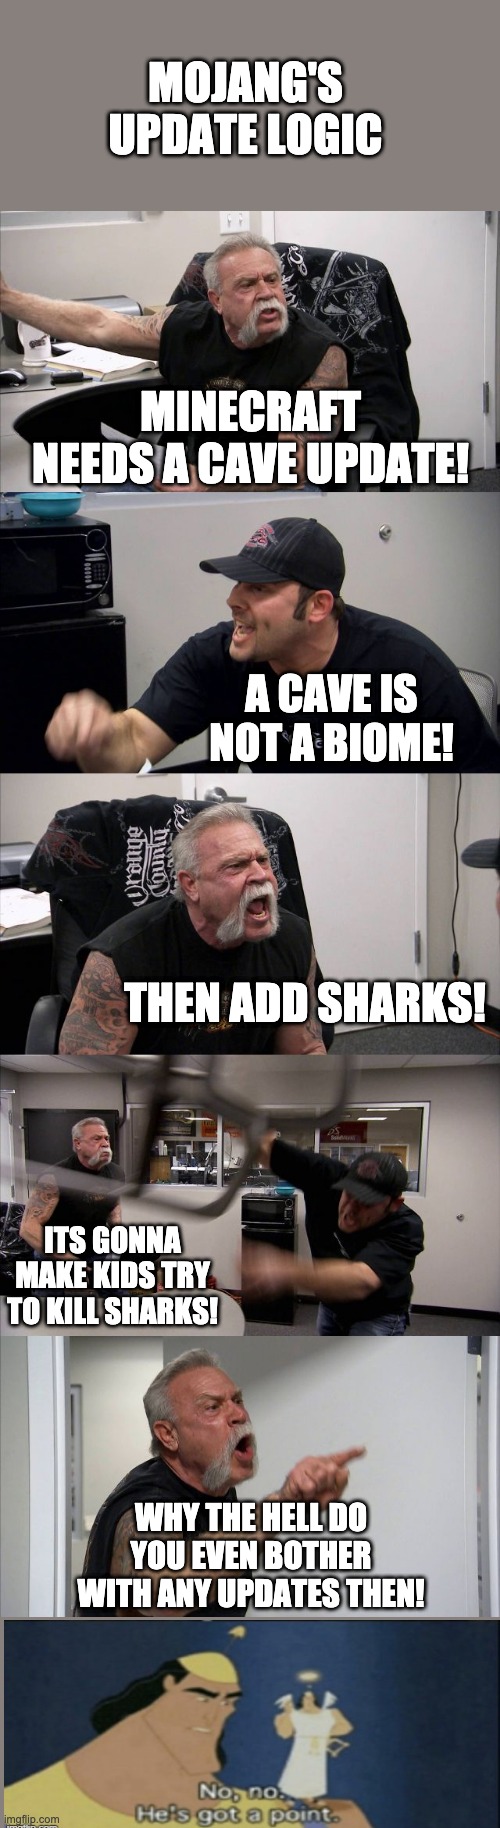 American Chopper Argument Meme | MOJANG'S UPDATE LOGIC; MINECRAFT NEEDS A CAVE UPDATE! A CAVE IS NOT A BIOME! THEN ADD SHARKS! ITS GONNA MAKE KIDS TRY TO KILL SHARKS! WHY THE HELL DO YOU EVEN BOTHER WITH ANY UPDATES THEN! | image tagged in memes,american chopper argument | made w/ Imgflip meme maker